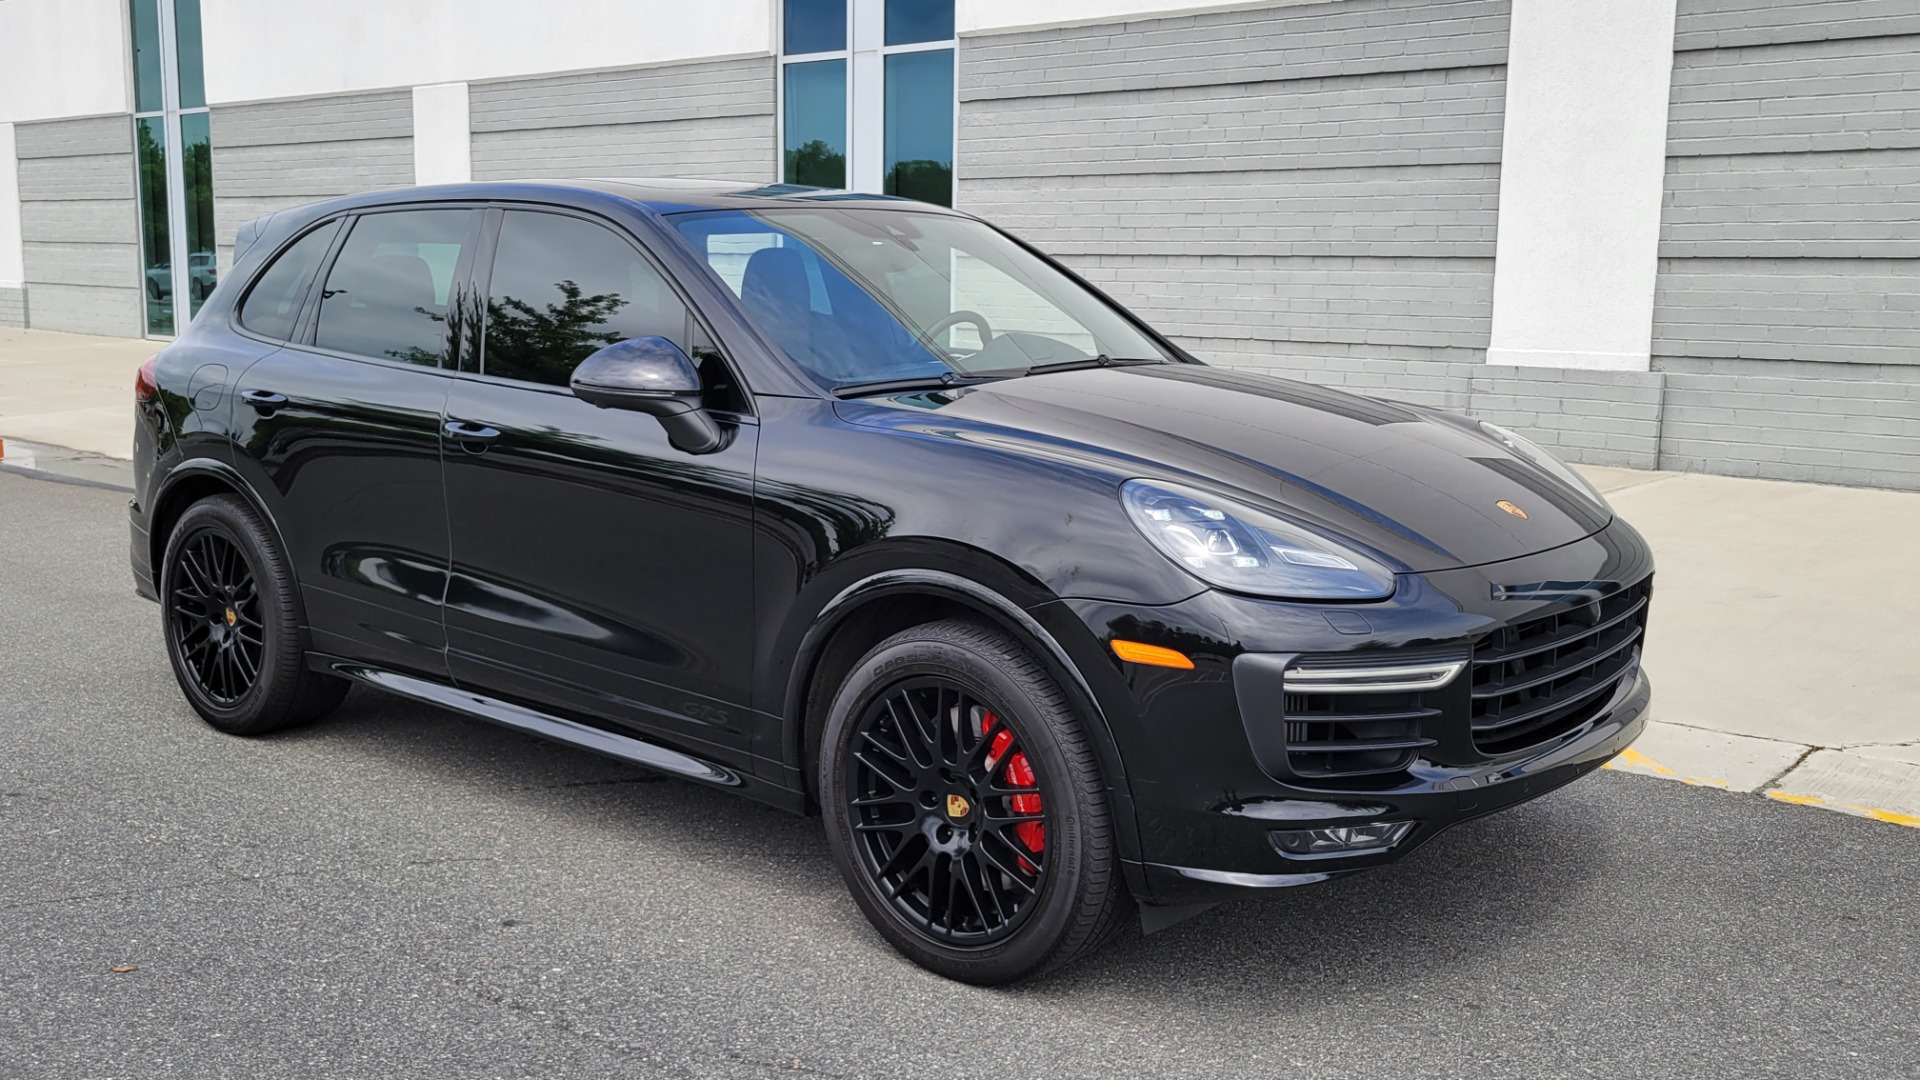 Used 2017 Porsche CAYENNE GTS 3.6L / NAV / SUNROOF / BOSE / PARK ASST / LCA / CAMERA for sale $64,995 at Formula Imports in Charlotte NC 28227 9